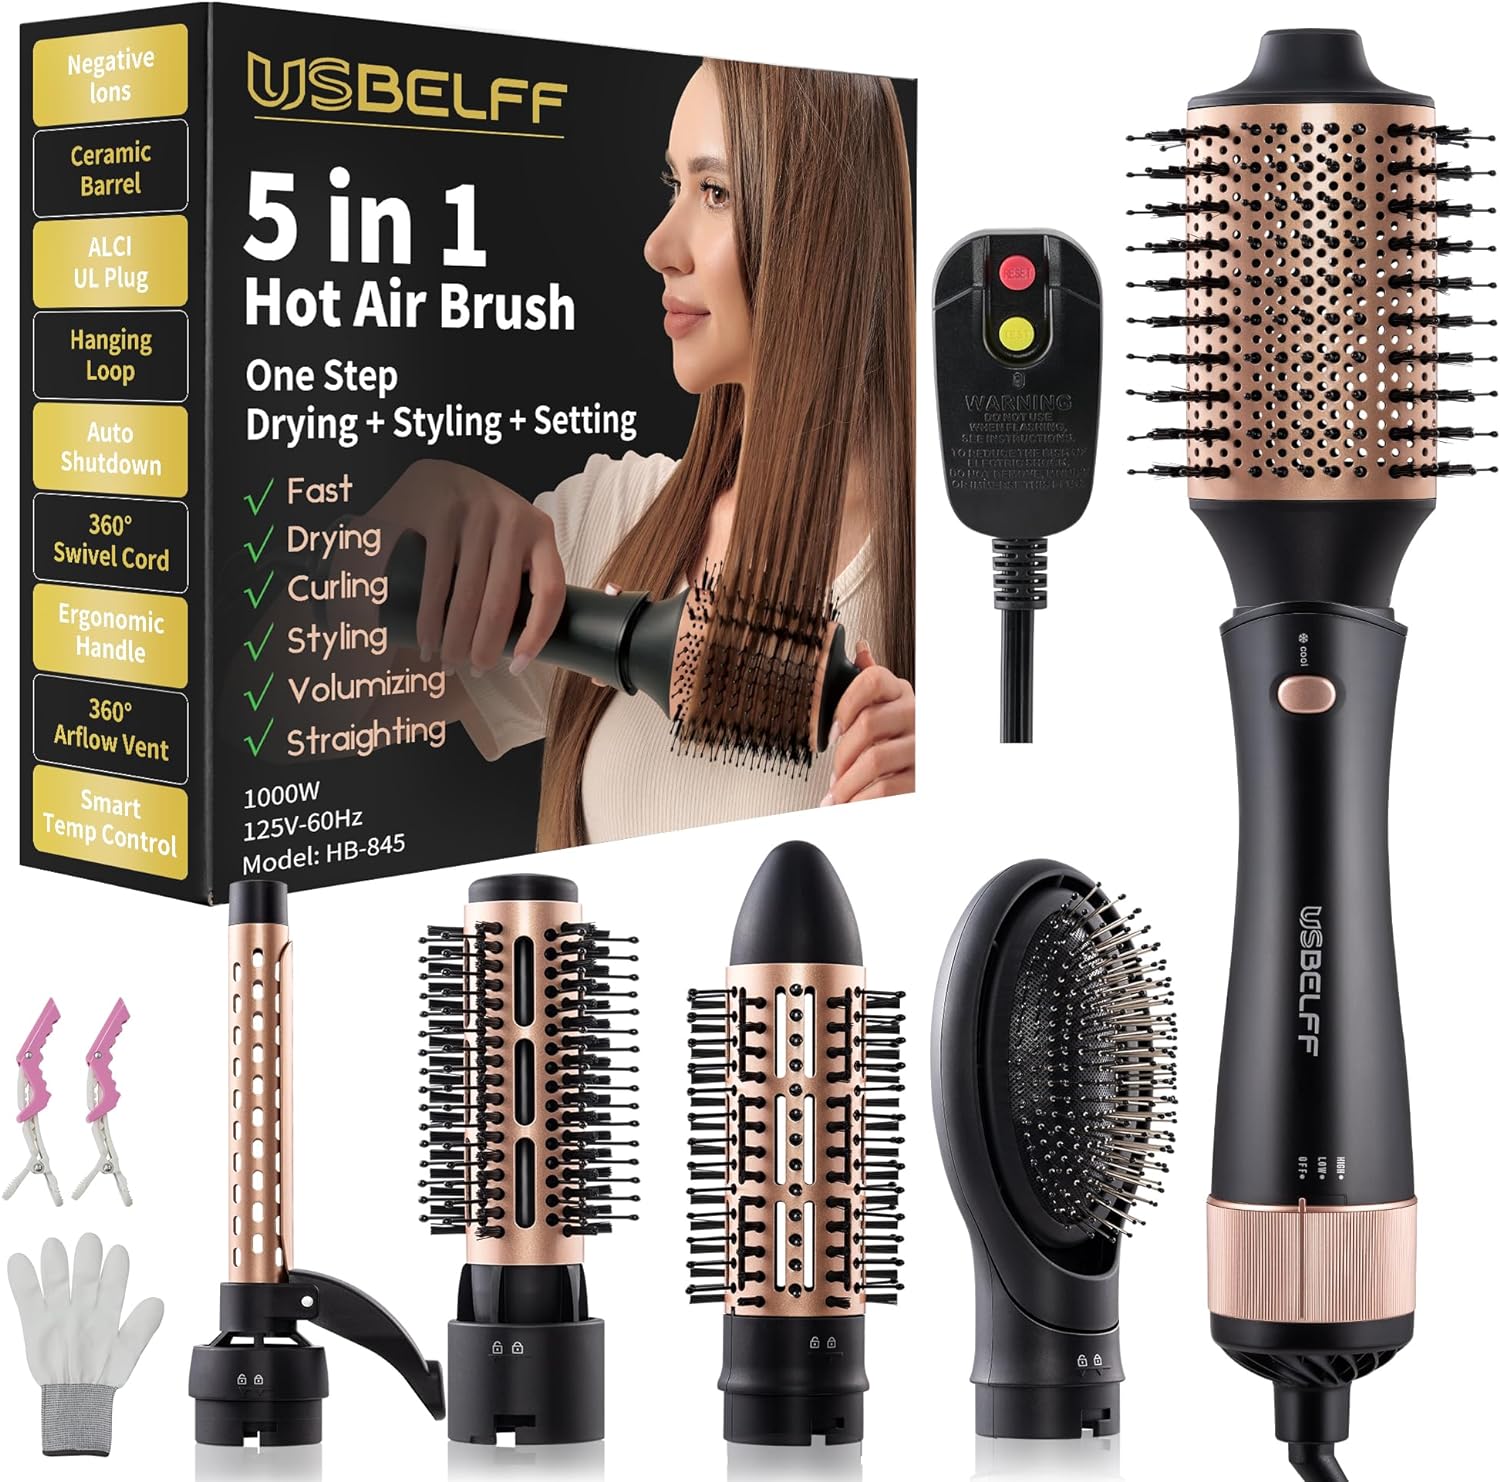 Hot Air Hair Dryer Brush - 5-in-1 Round Blow Drying Brush Set for One-Step Blow Drying, Volumizing, Styling Straighting and Slightly Waving Hairs